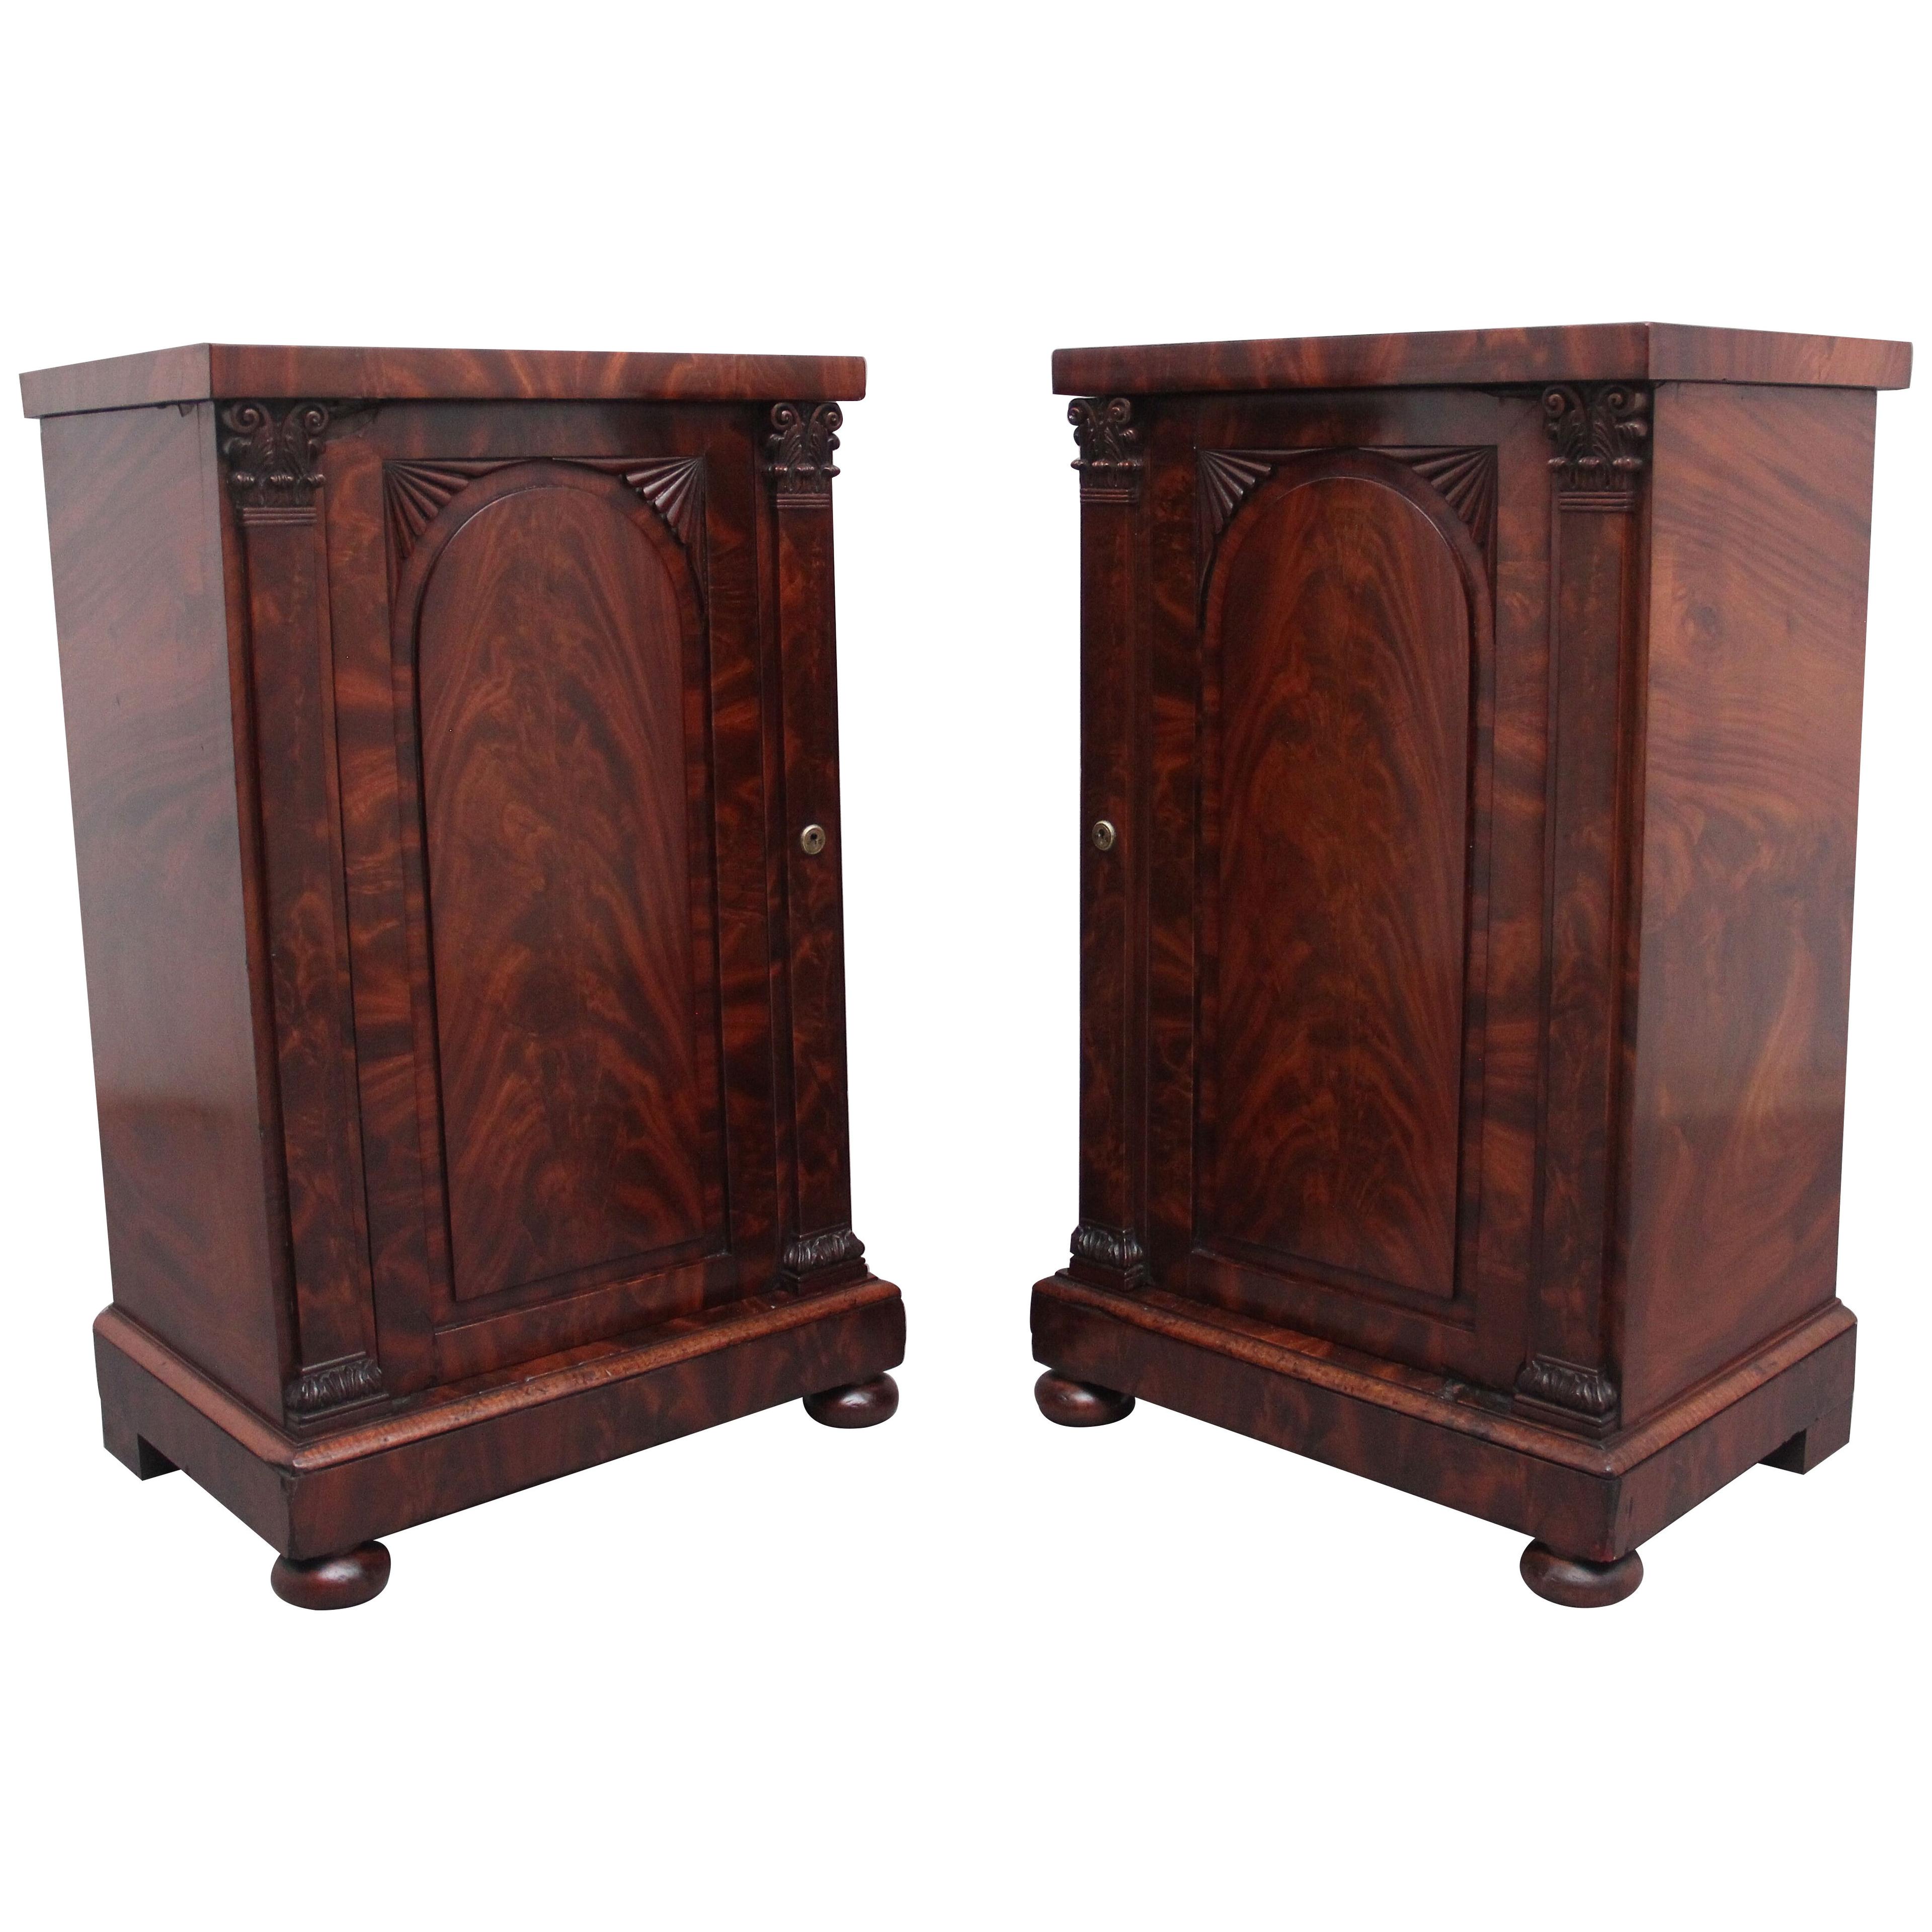 A pair of 19th Century flame mahogany bedside cabinets